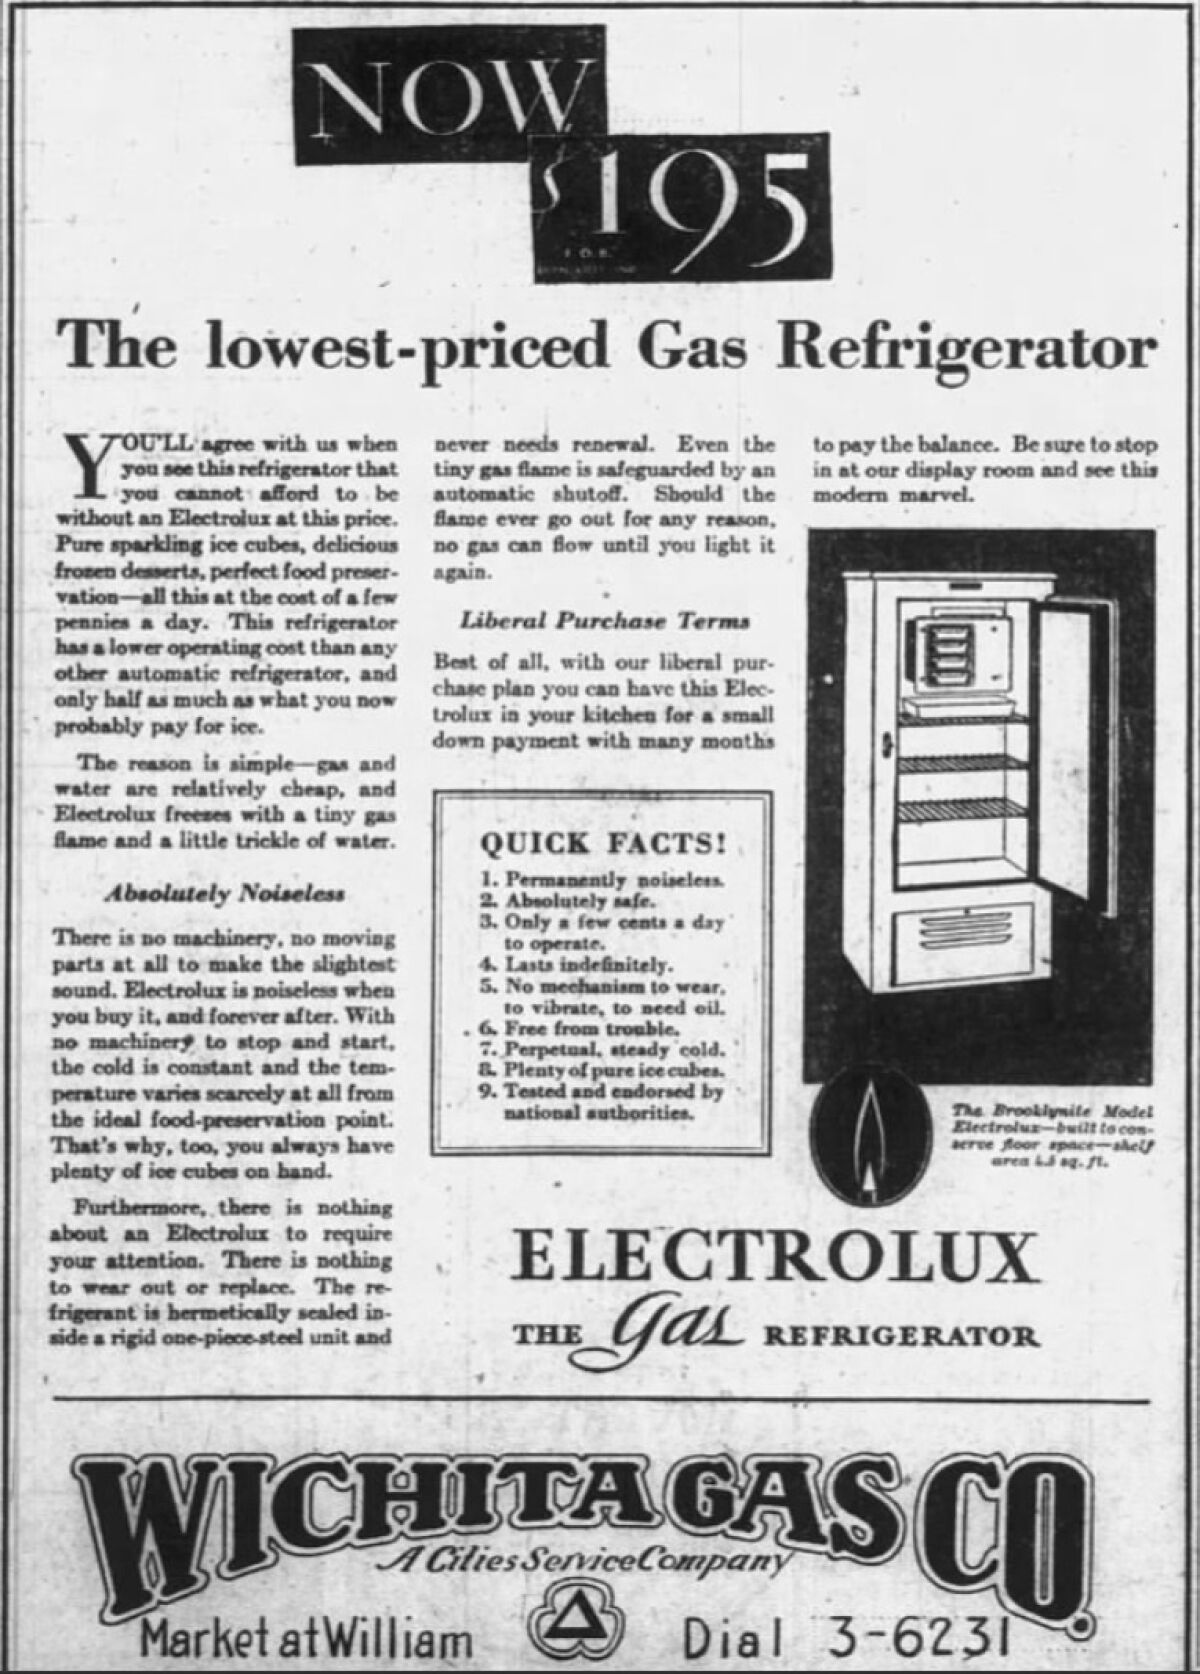 A 1930 newspaper ad for an Electrolux gas refrigerator offered for $195.